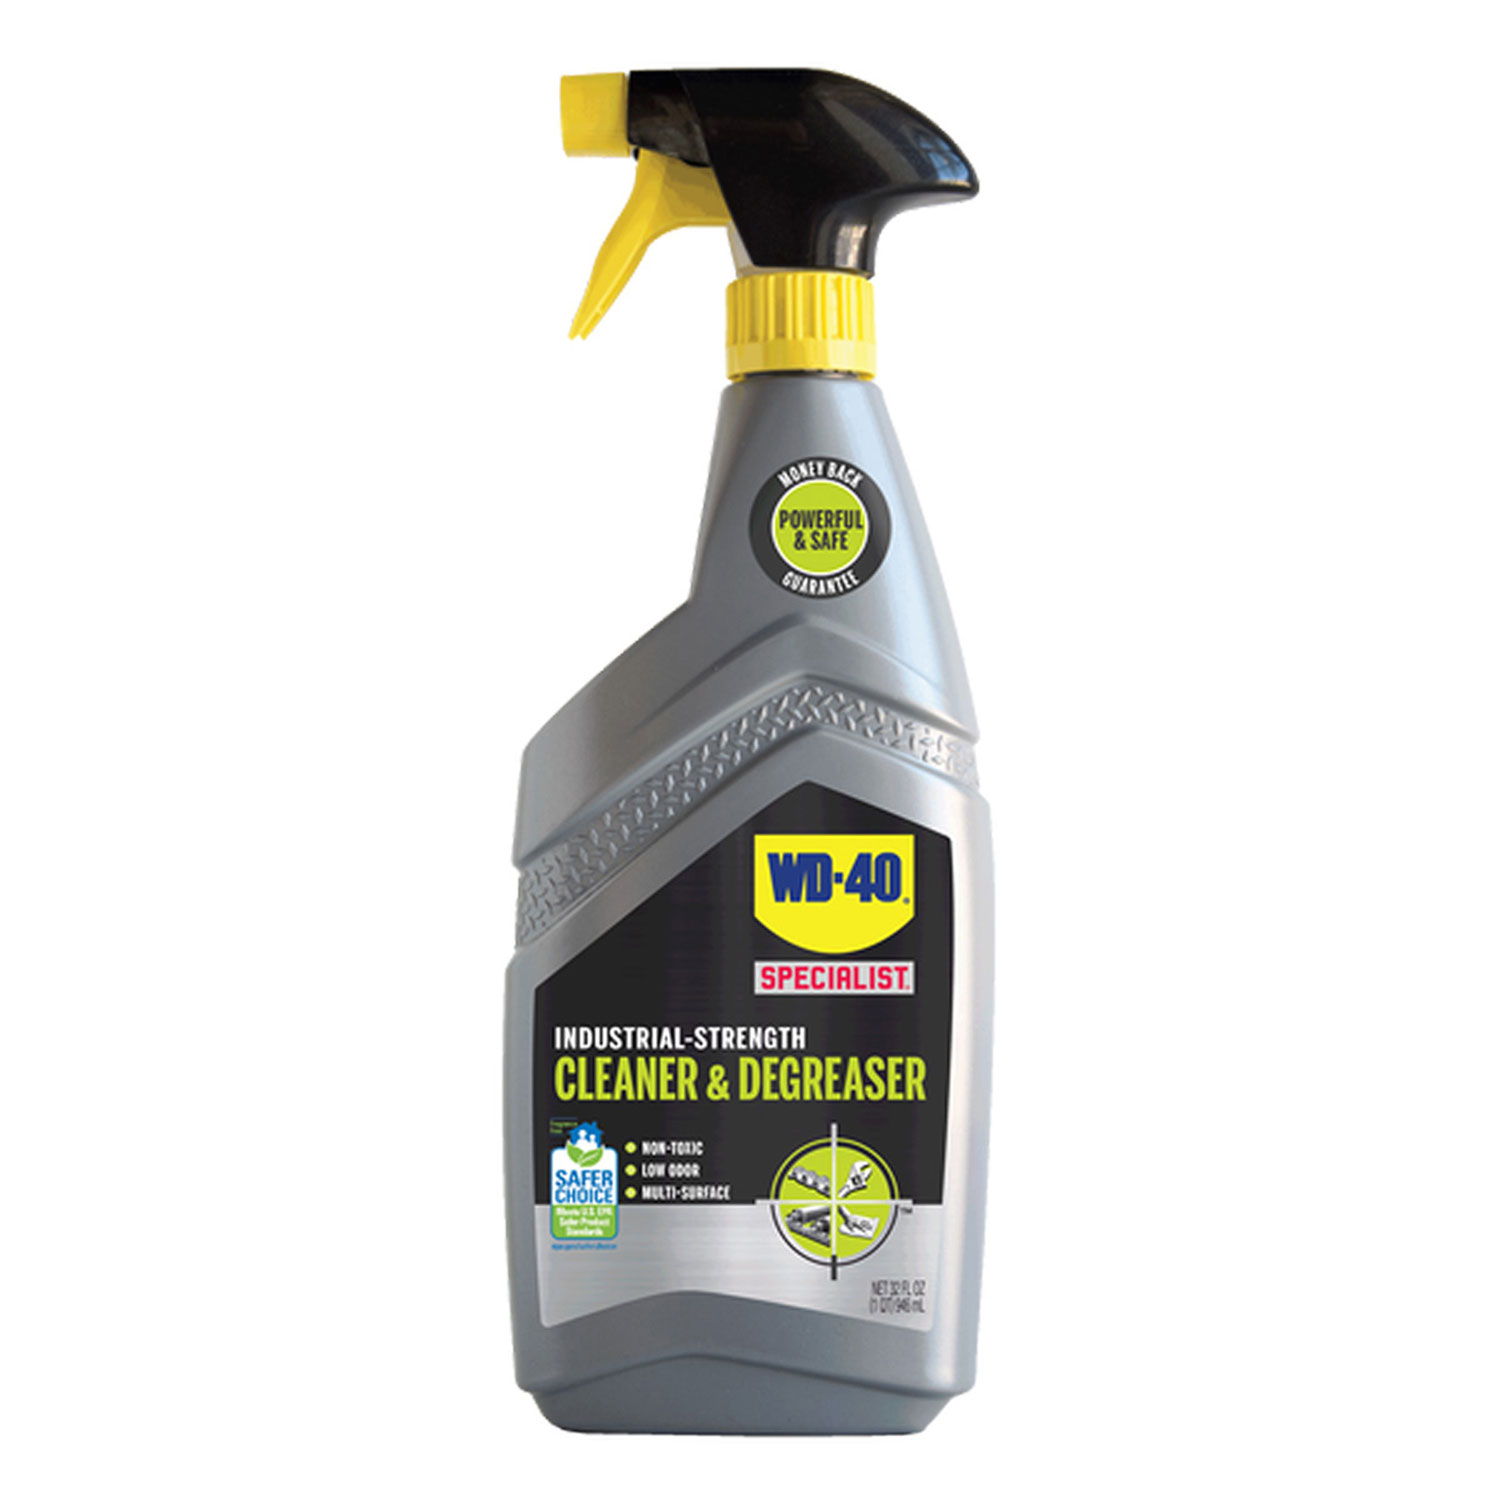  WD-40 300356 Specialist Industrial Strength Cleaner and Degreaser, 32 oz Bottle, 6/Carton (WDF300356) 